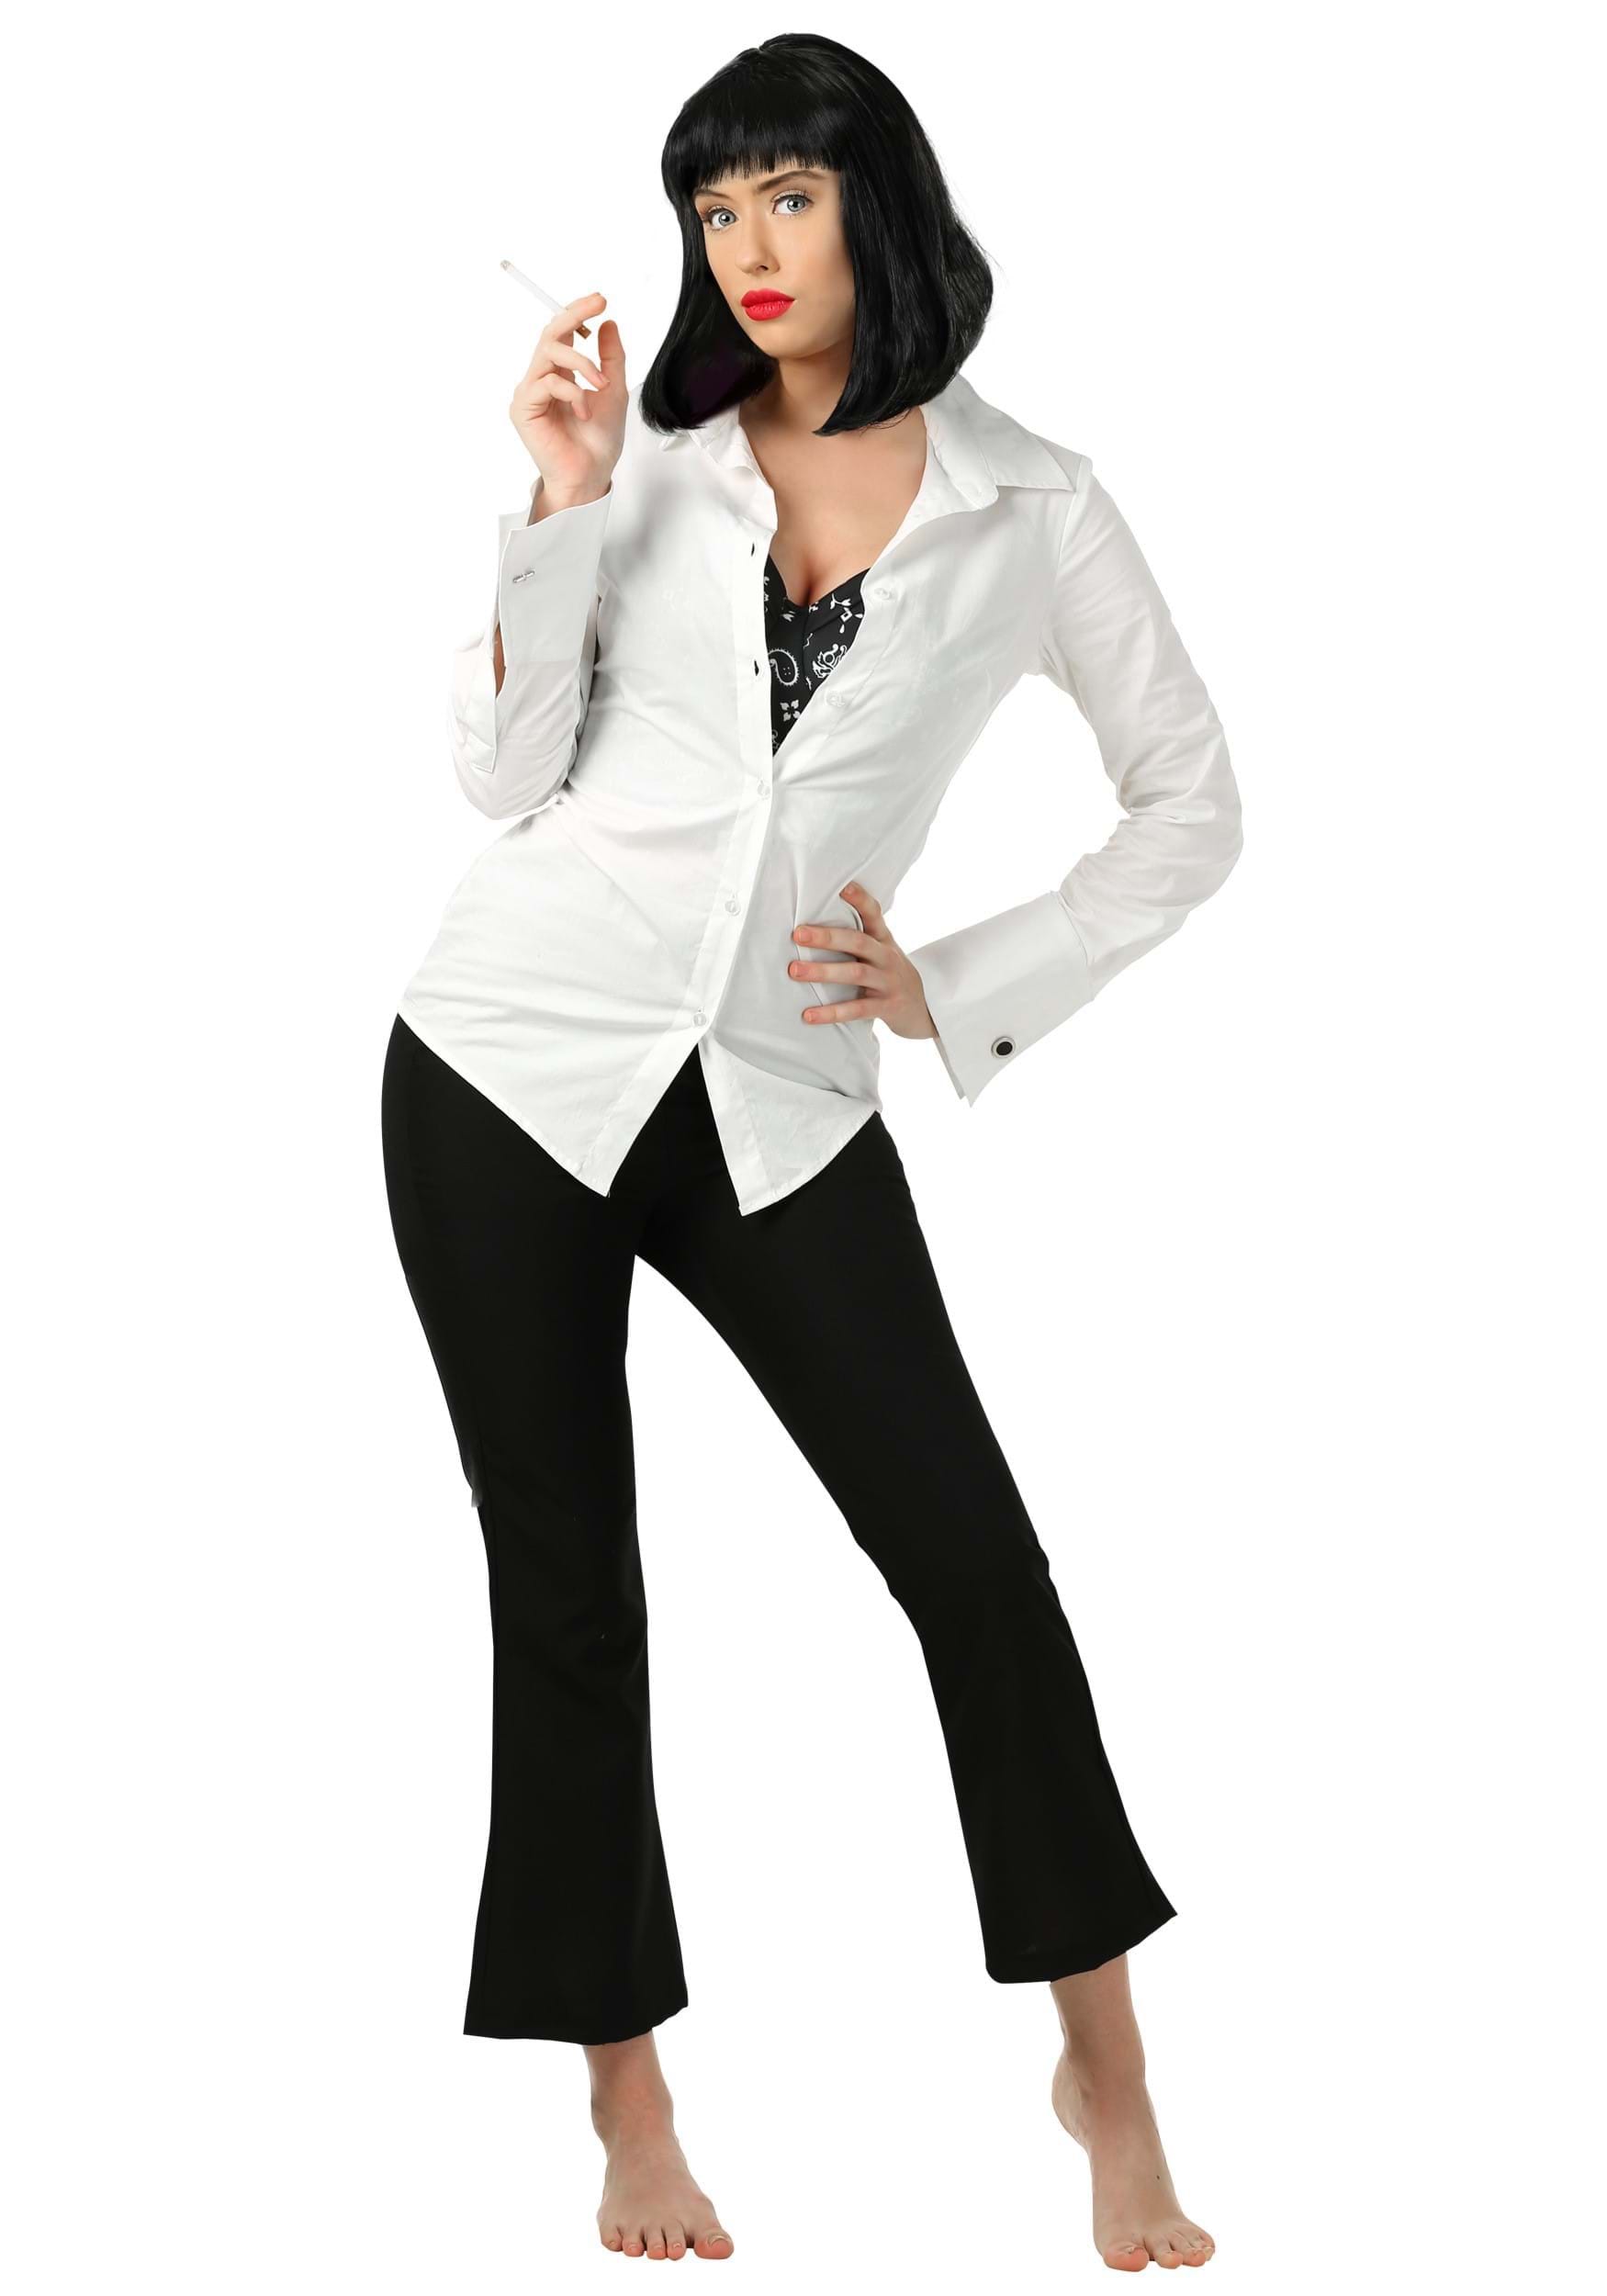 Mia Wallace Pulp Fiction Adult Costume